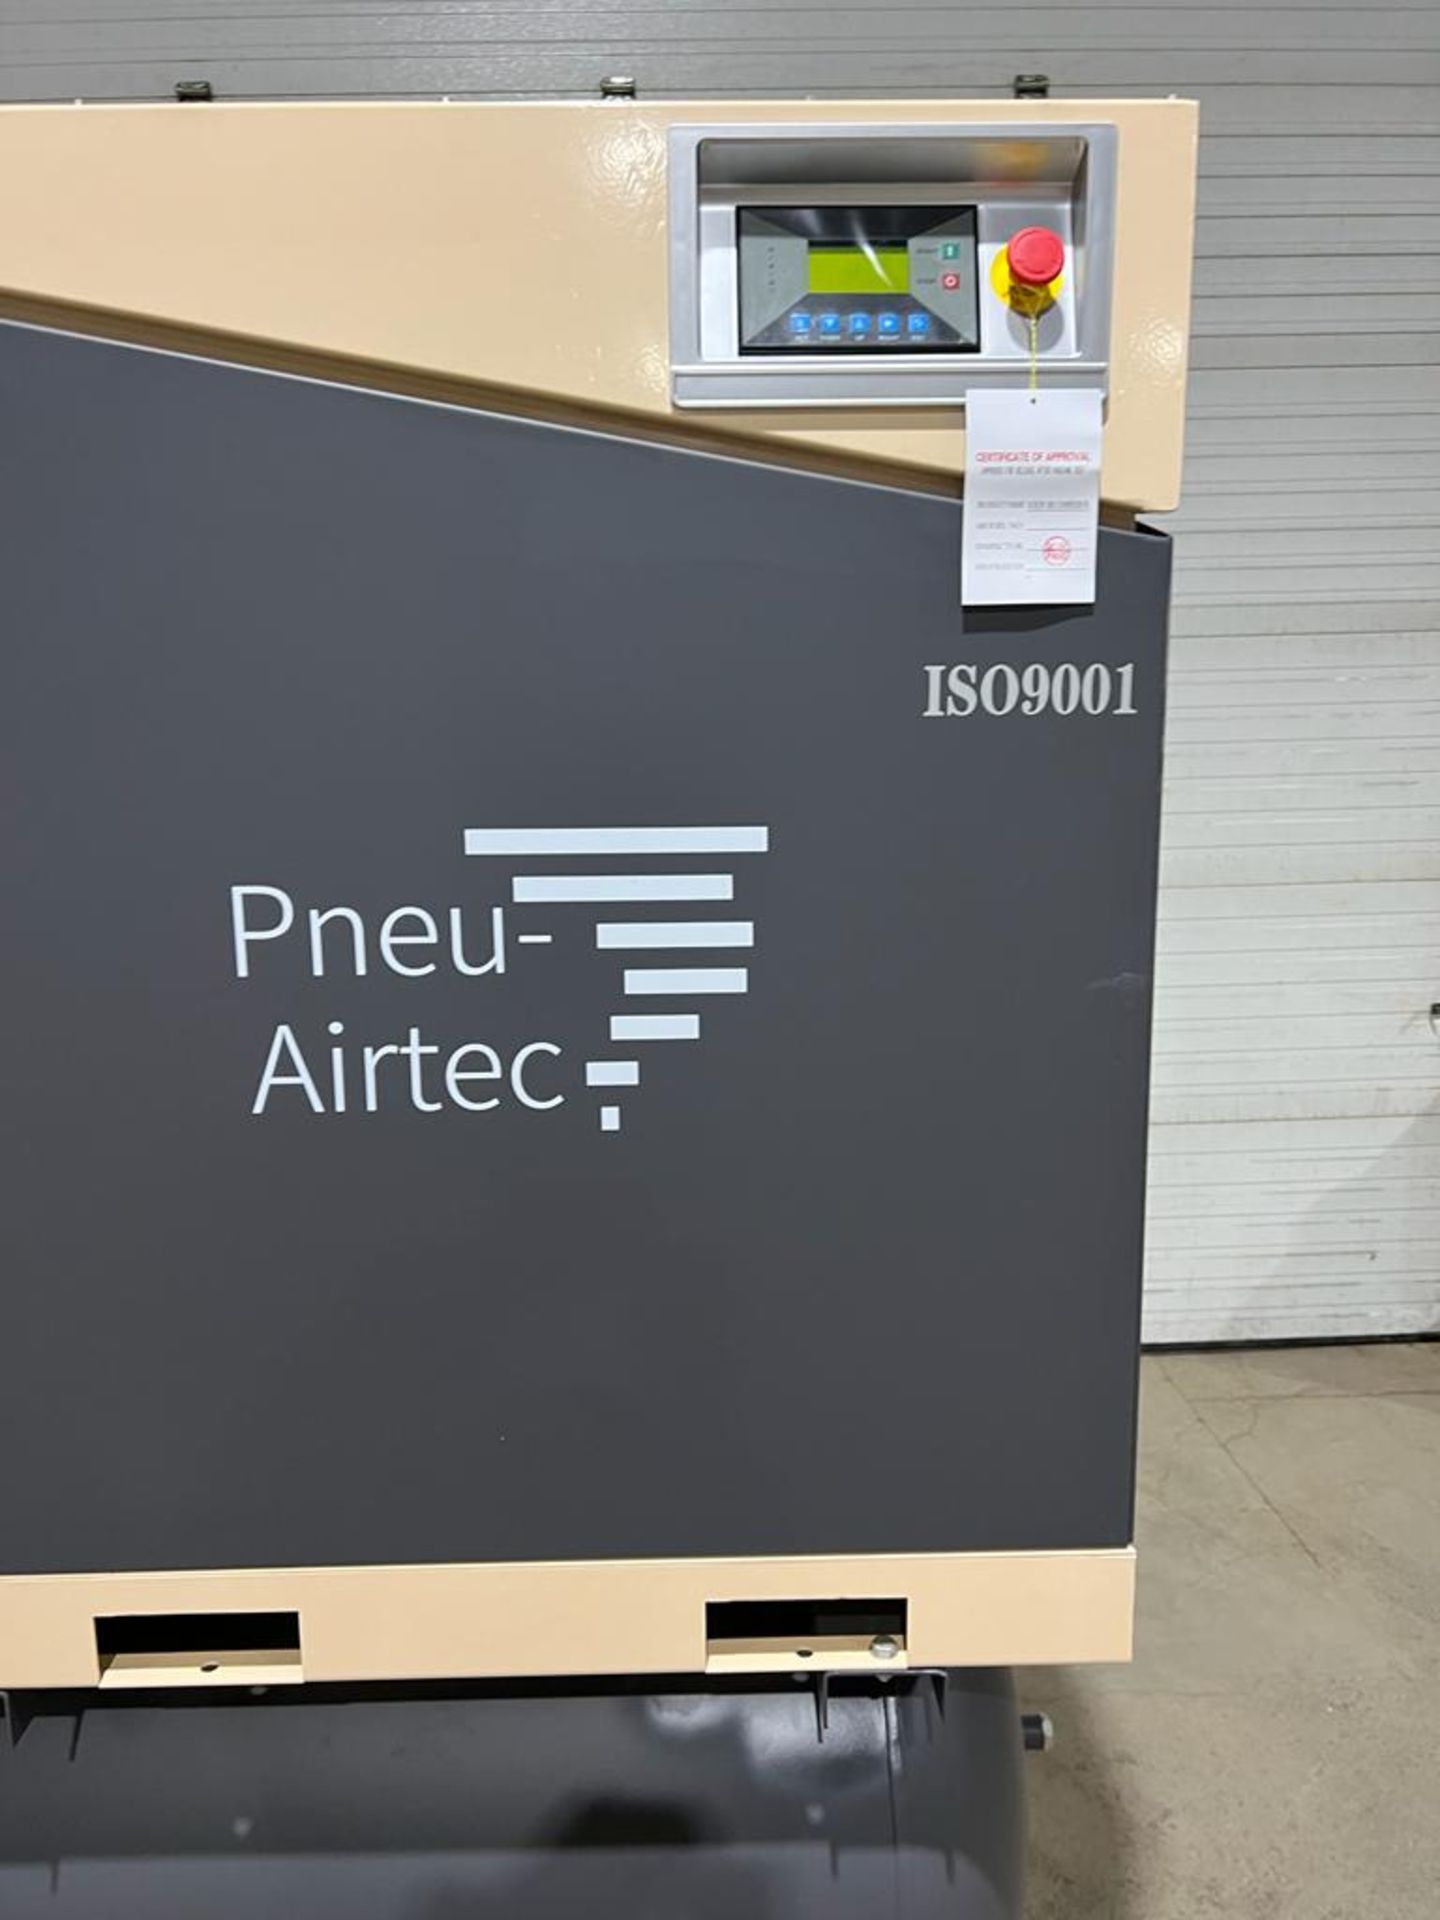 Pneu-Airtec model 30FF - 30HP Air Compressor with built on DRYER - MINT UNUSED COMPRESSOR with - Image 4 of 4